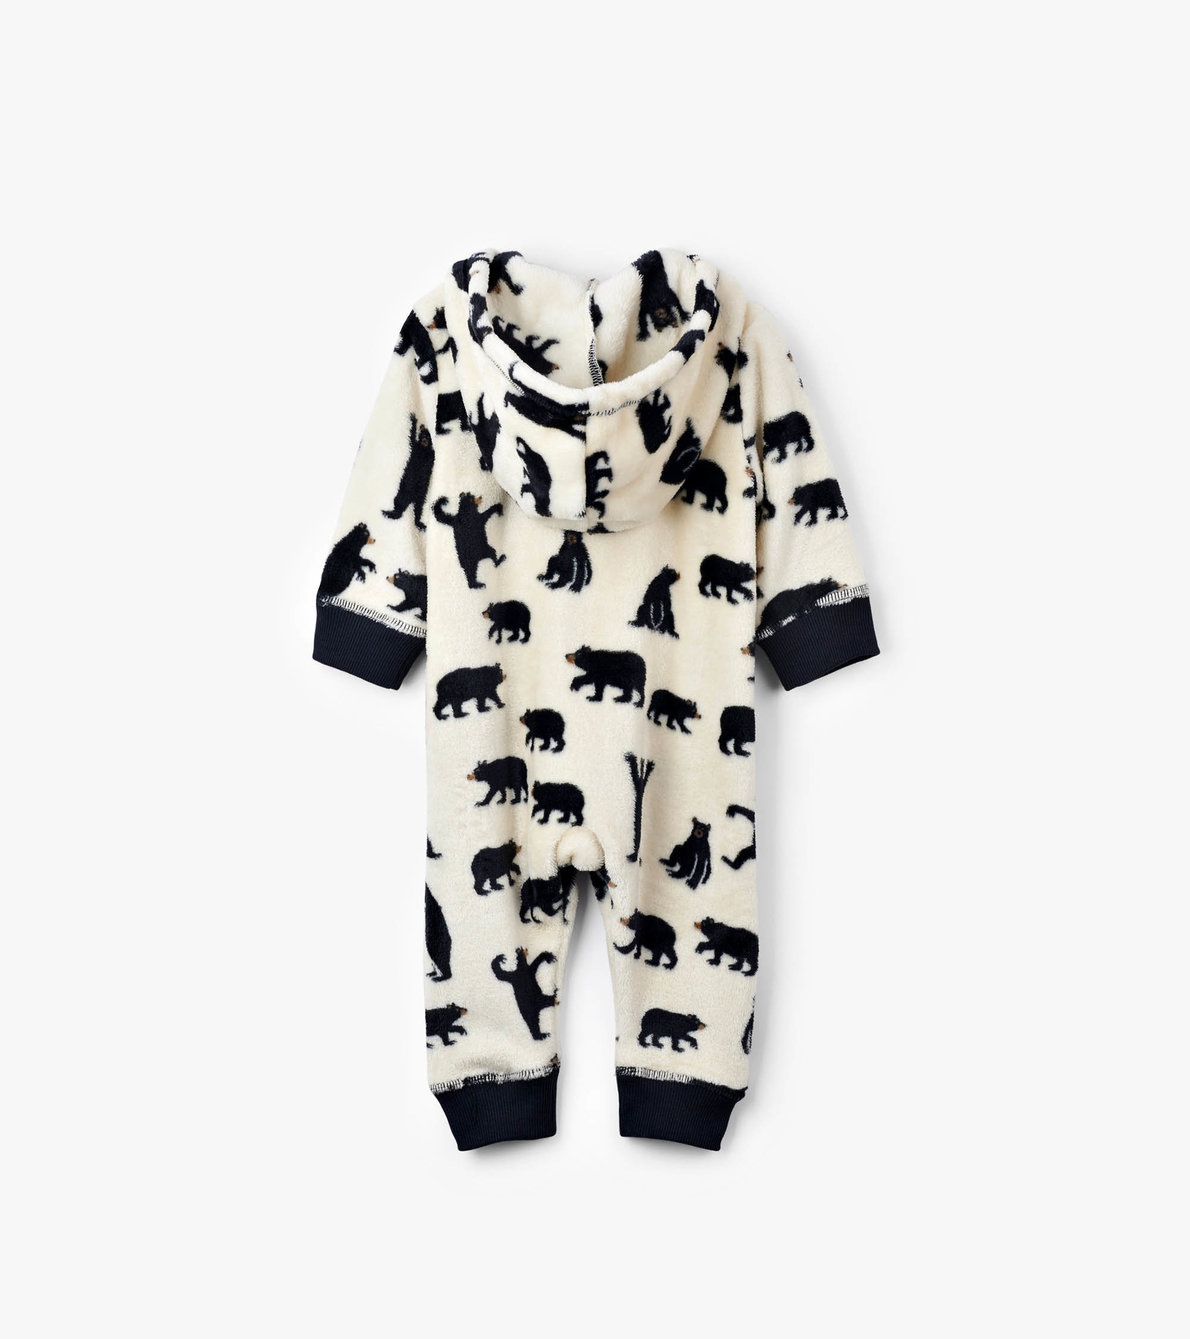 View larger image of Black Bears Baby Hooded Fleece Jumpsuit